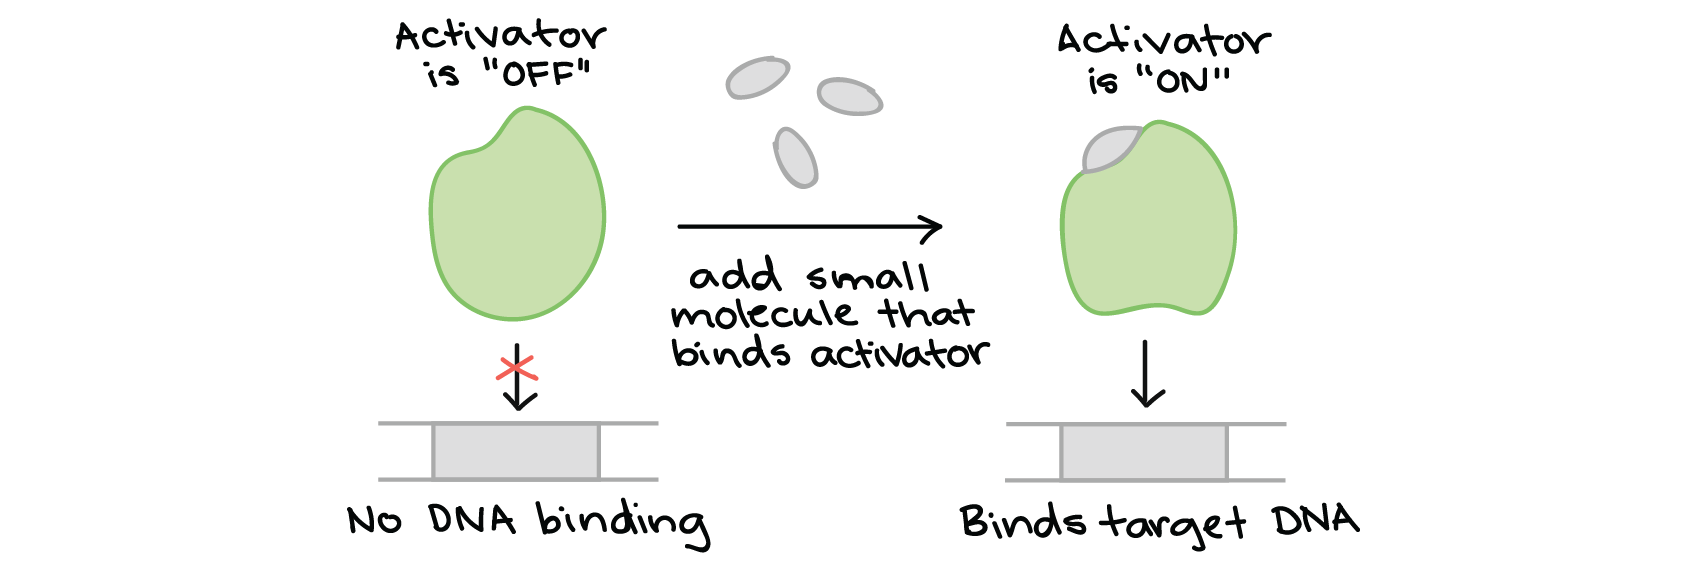 Diagram illustrating how a hypothetical activator's activity could be modulated by a small molecule. When the small molecule is absent, the activator is "off" - it takes on a shape that makes it unable to bind DNA. When the small molecule that activates the activator is added, it binds to the activator and changes its shape. This shape change makes the activator able to bind its target DNA sequence and activate transcription.